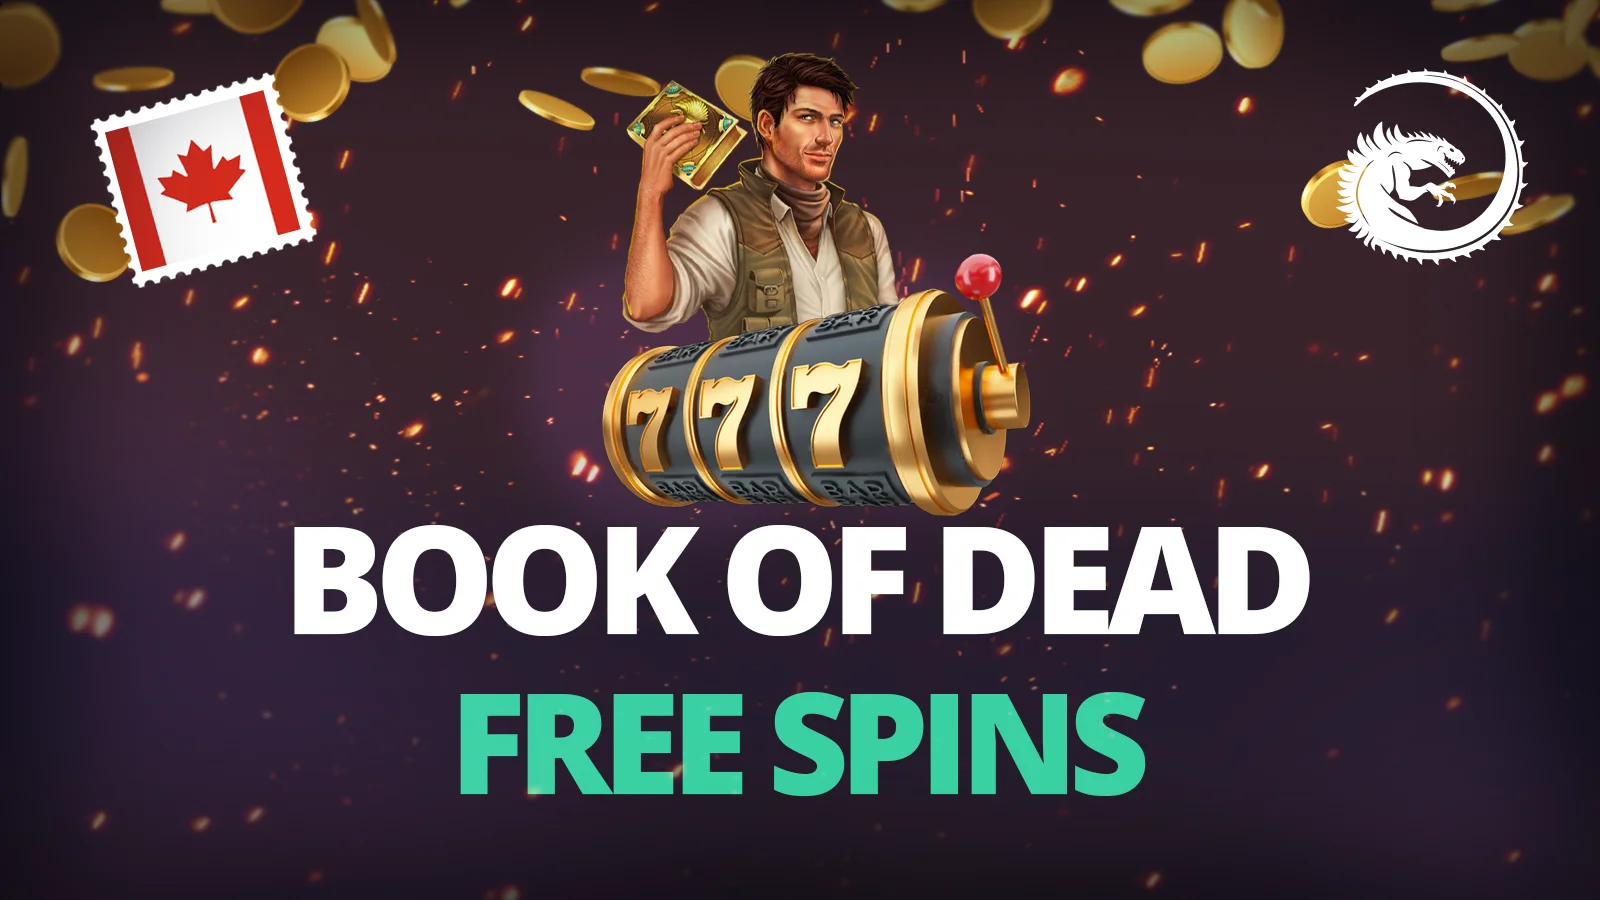 25 Free Spins on Book of Dead Slot + £123 Free Credit for Any Slot, Deposit £10